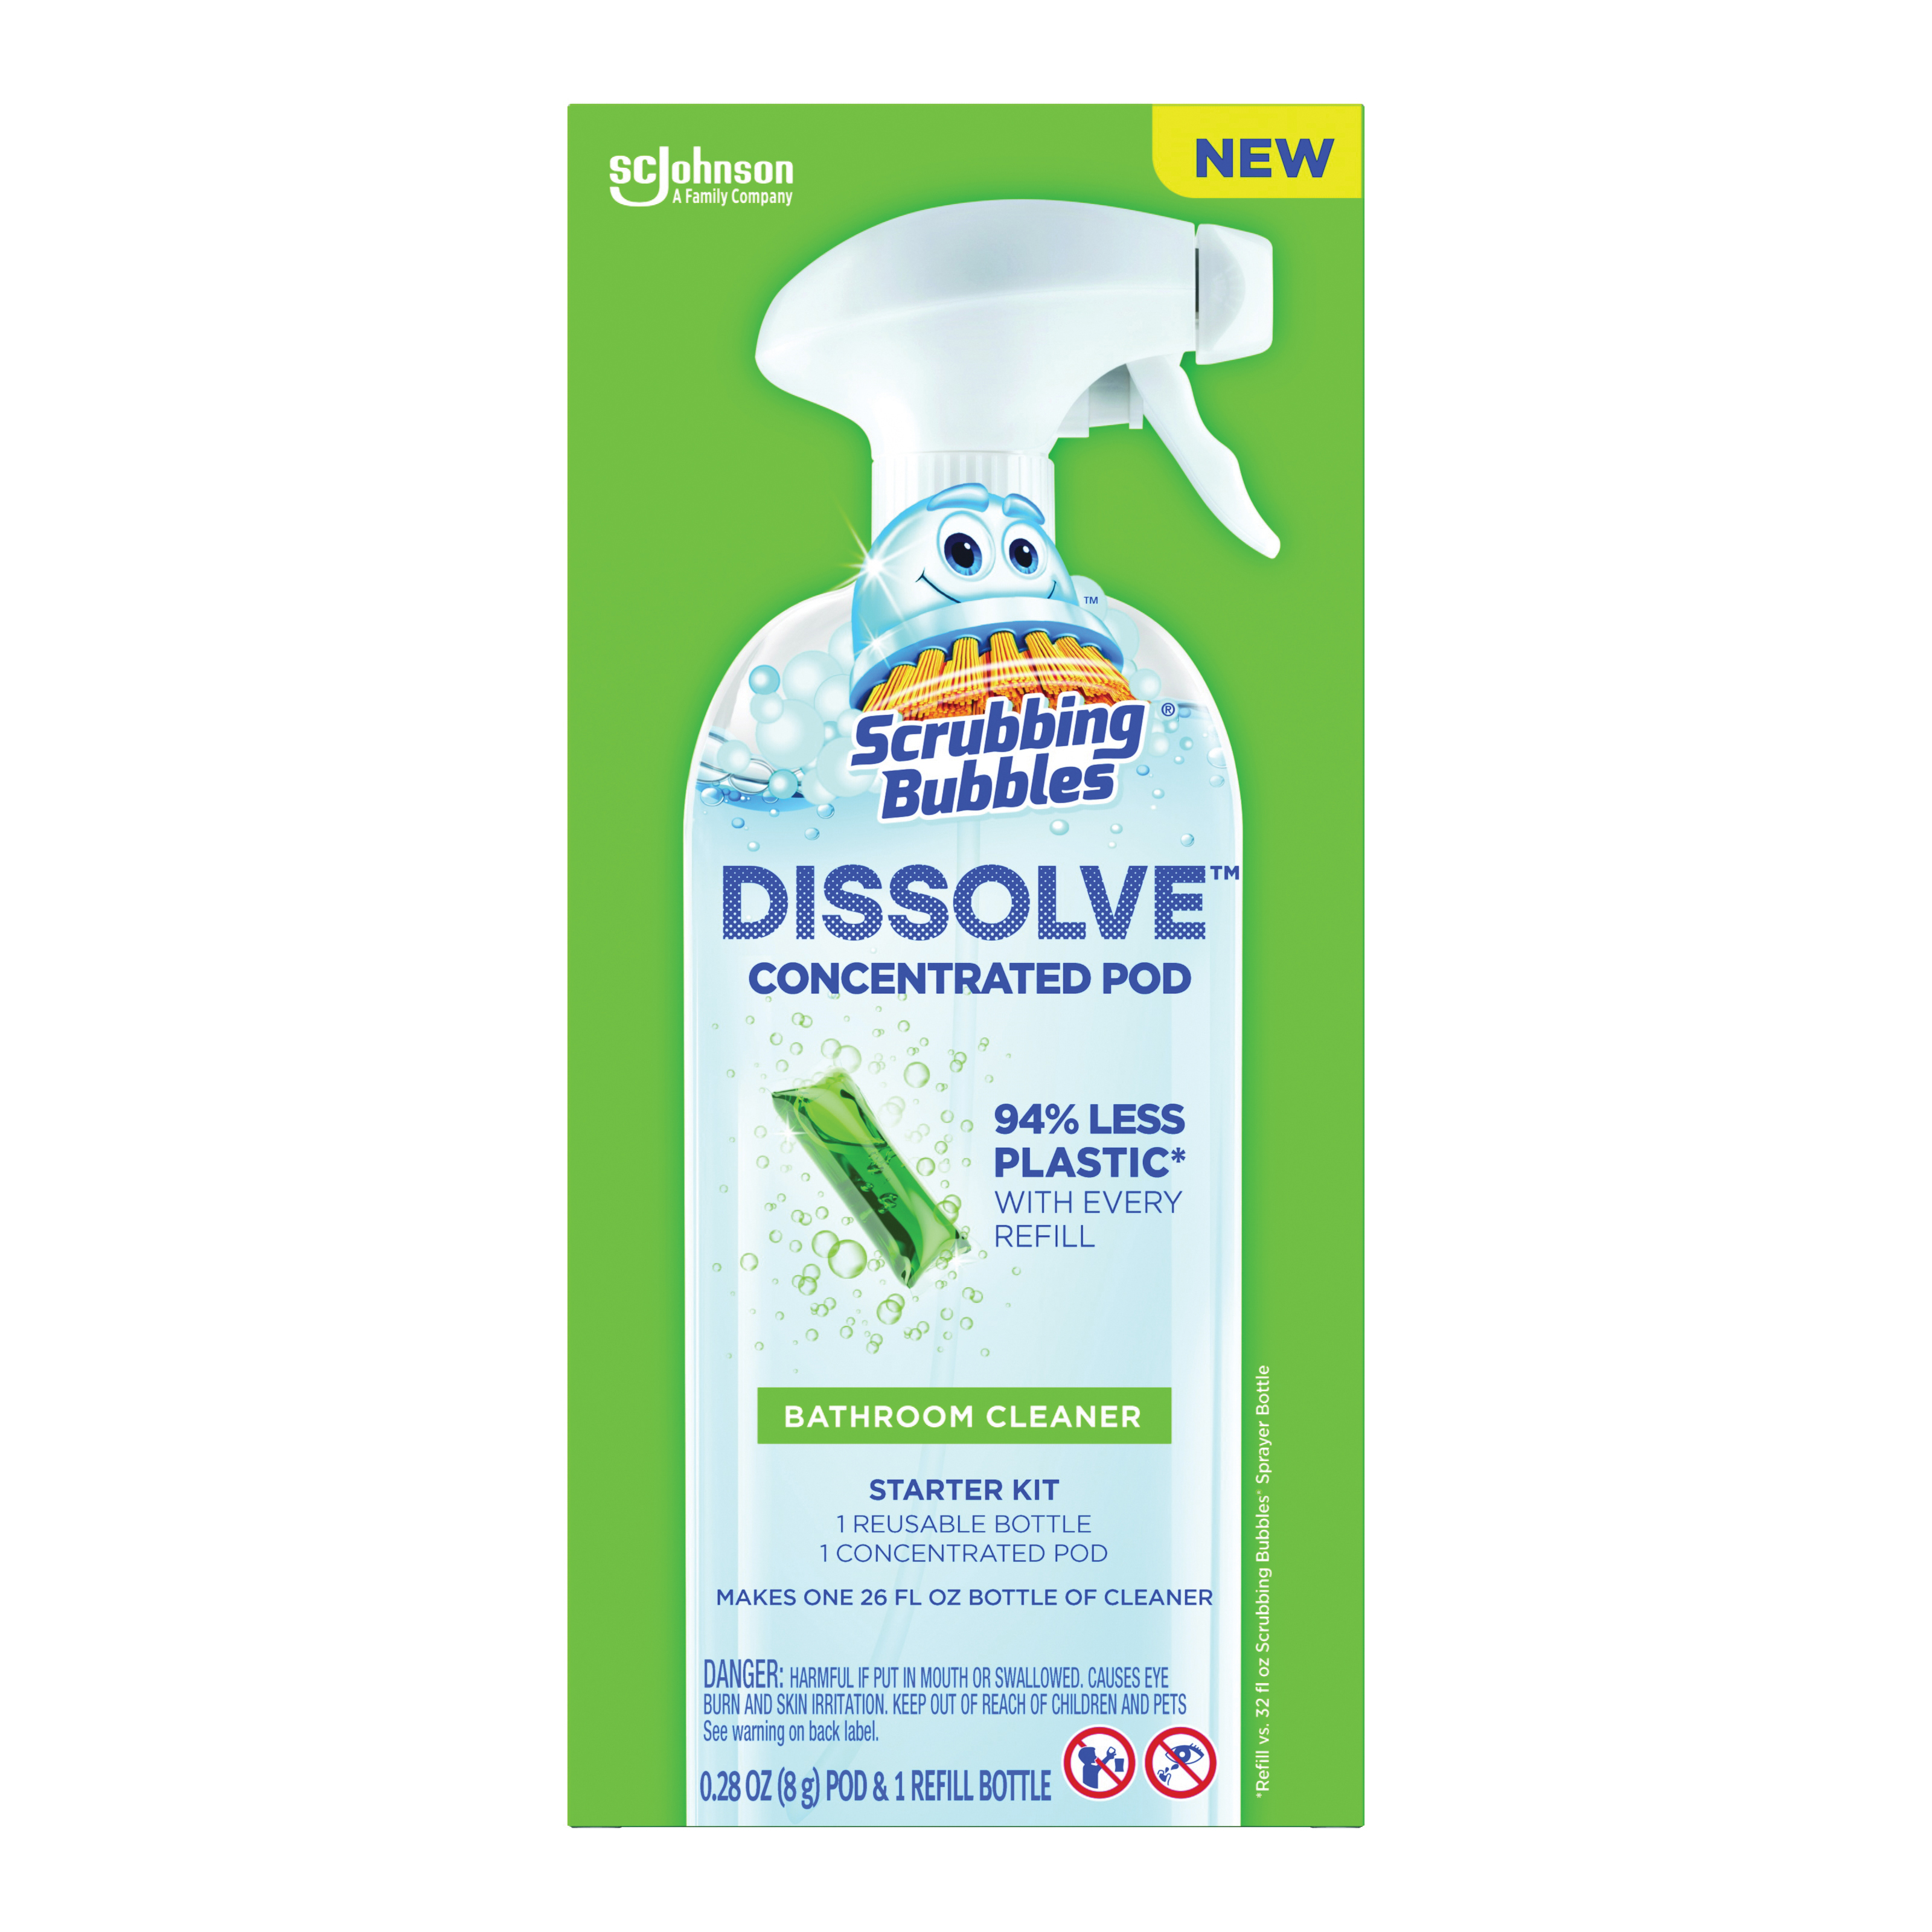 Dissolve 00046 Concentrated Bathroom Cleaner Starter Kit, Dissolve Pod, Marine, Ozone, Green Yellow